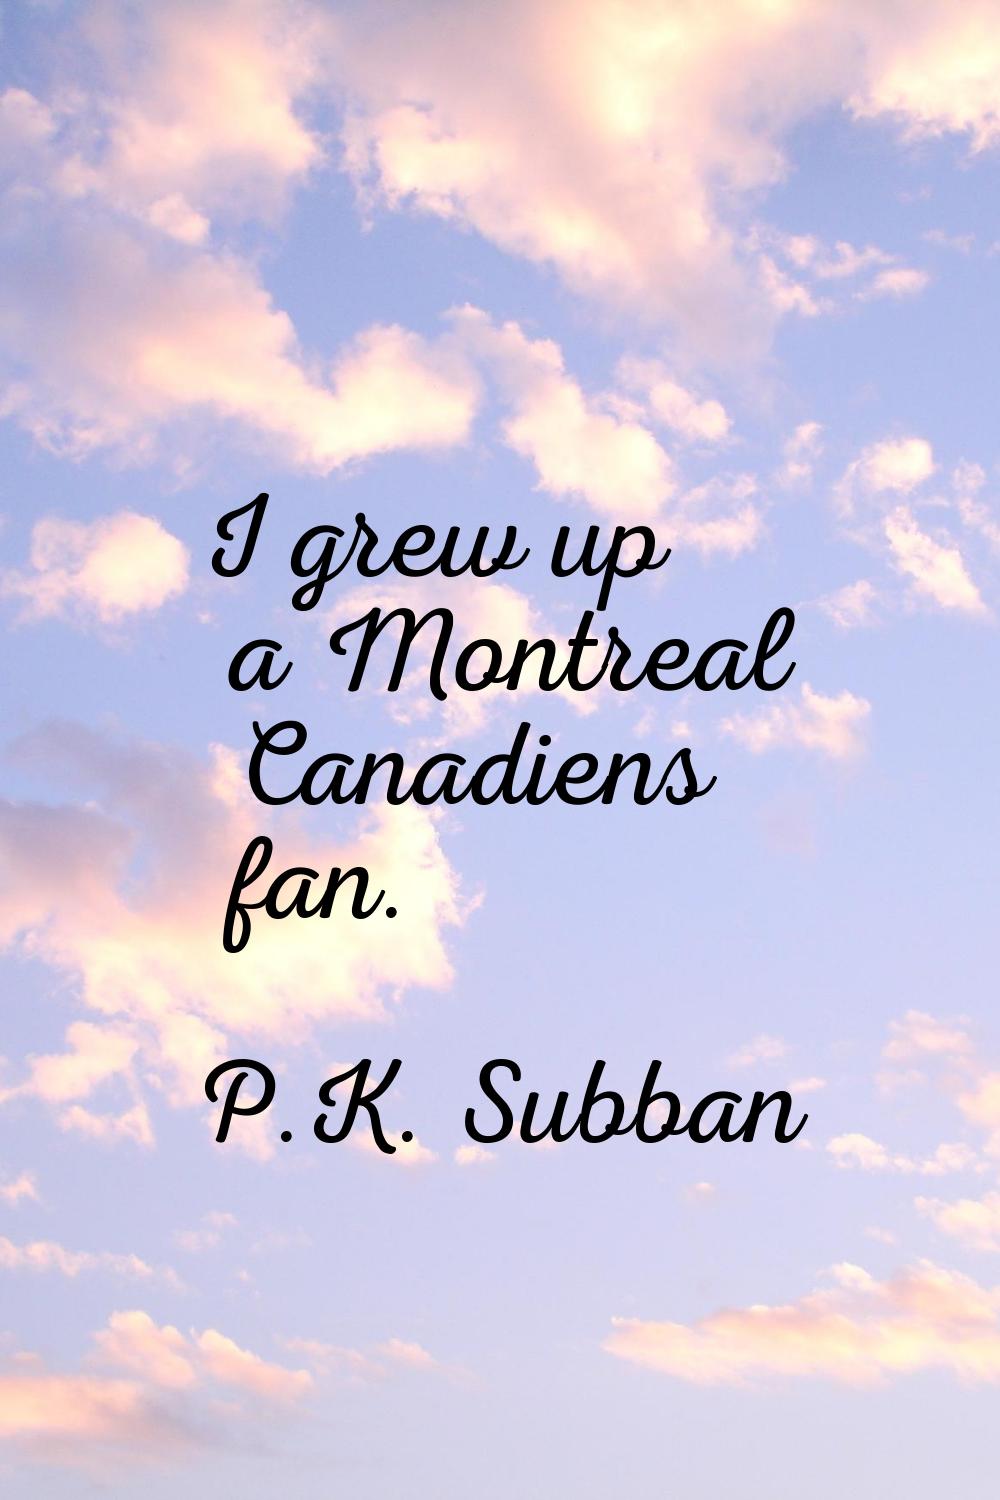 I grew up a Montreal Canadiens fan.